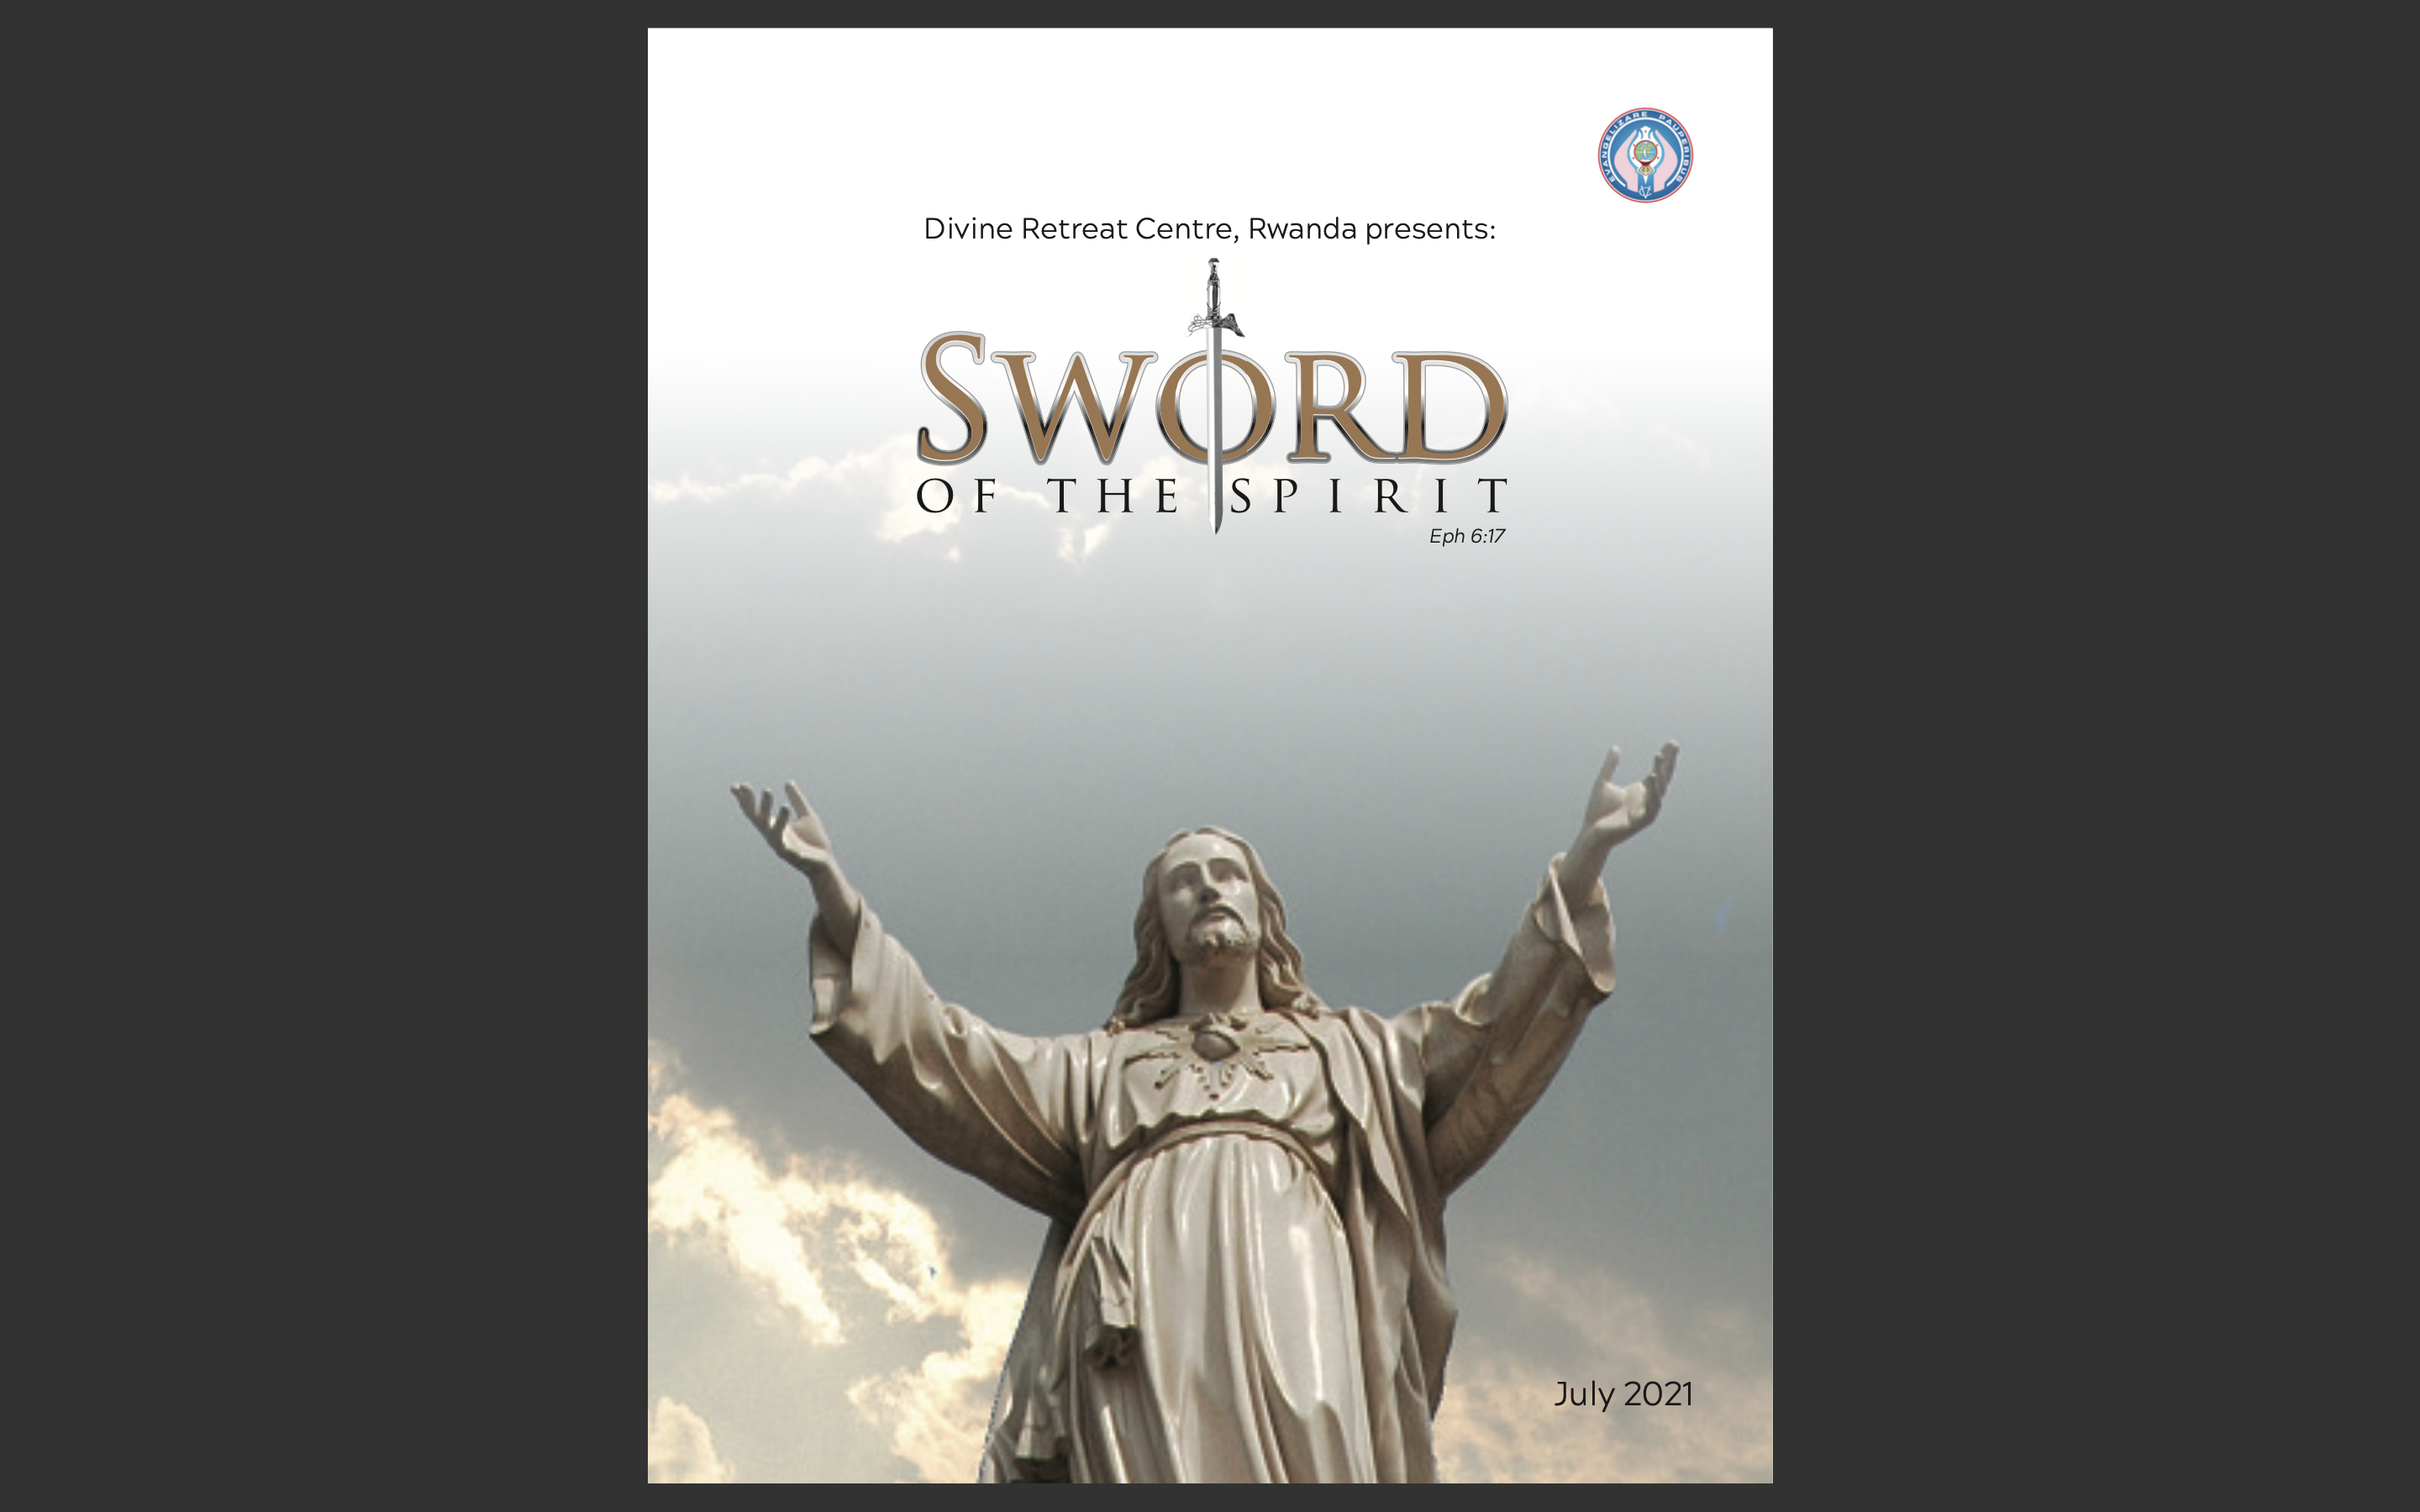 The sword of the spirit - July